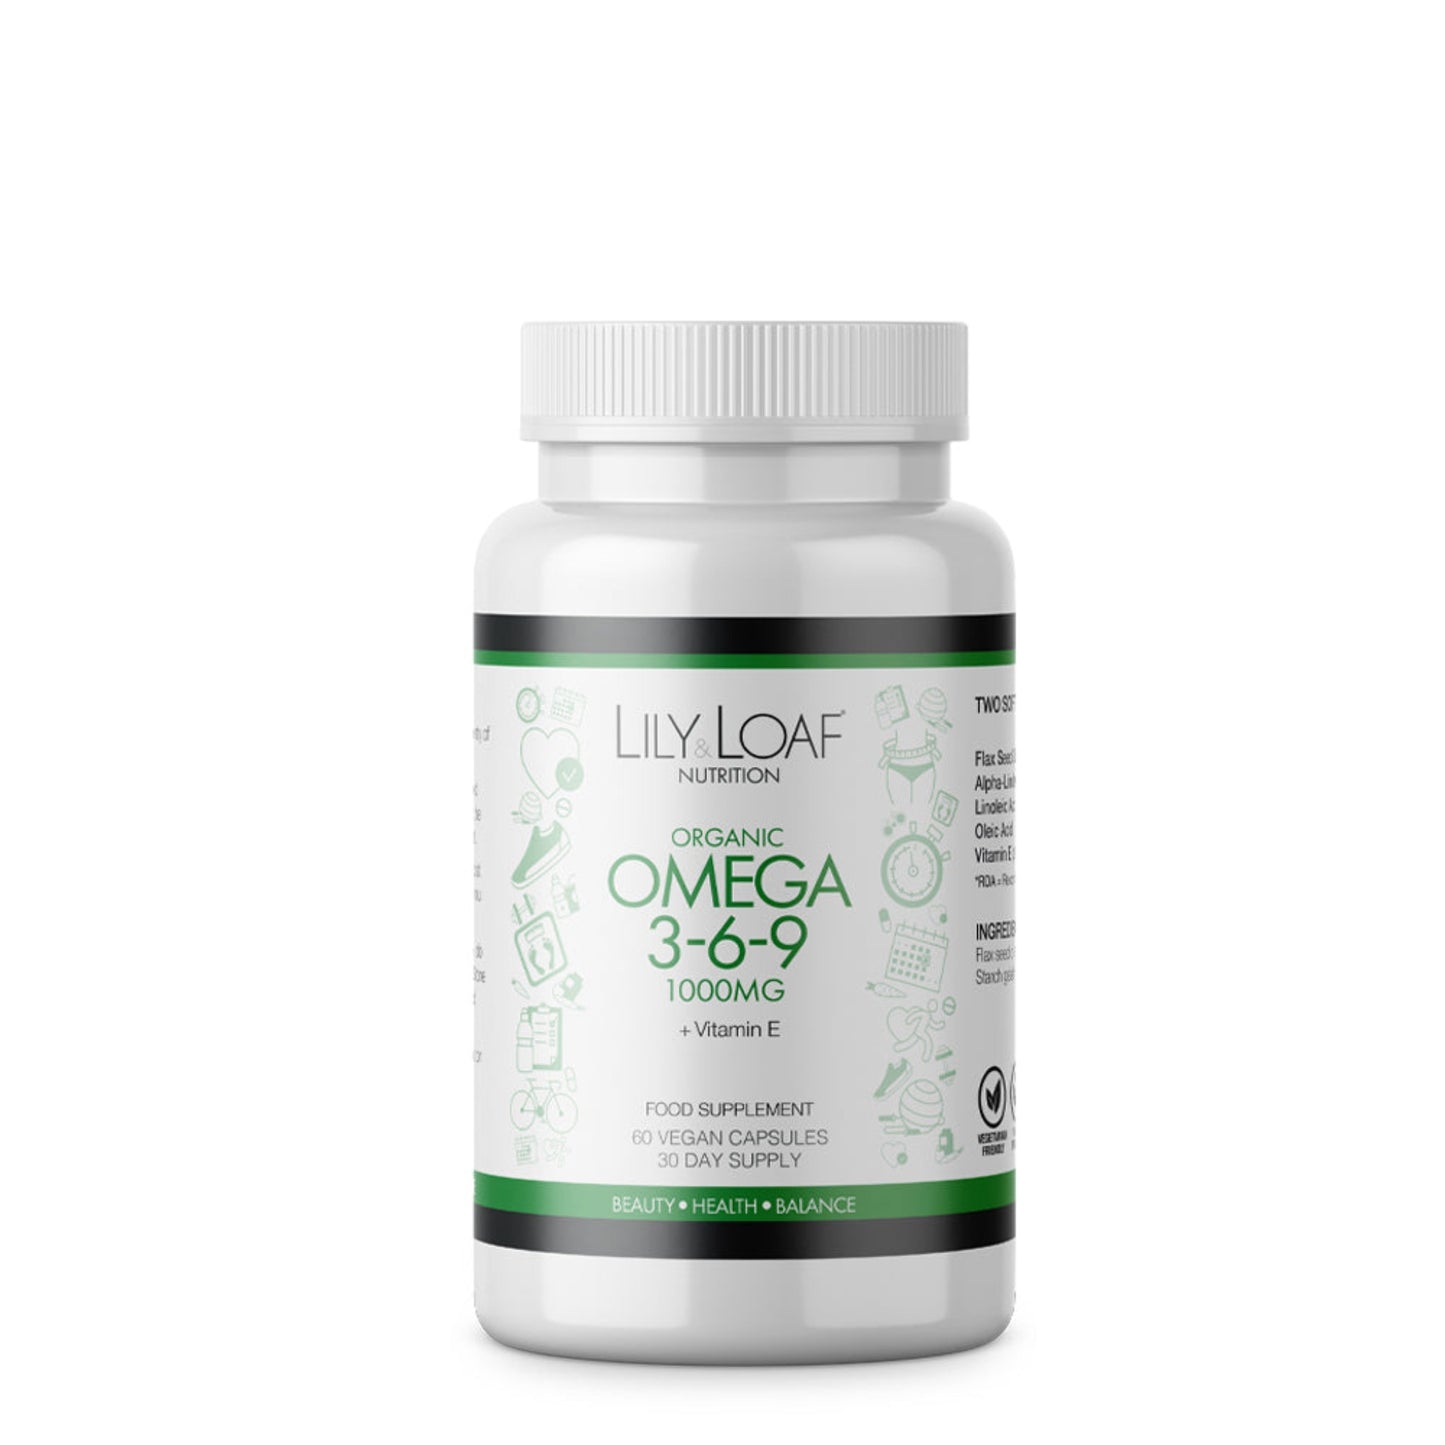 White bottle of Lily & Loaf Organic Omega 3-6-9 supplement with Vitamin E, containing 60 vegan capsules for a 30-day supply.